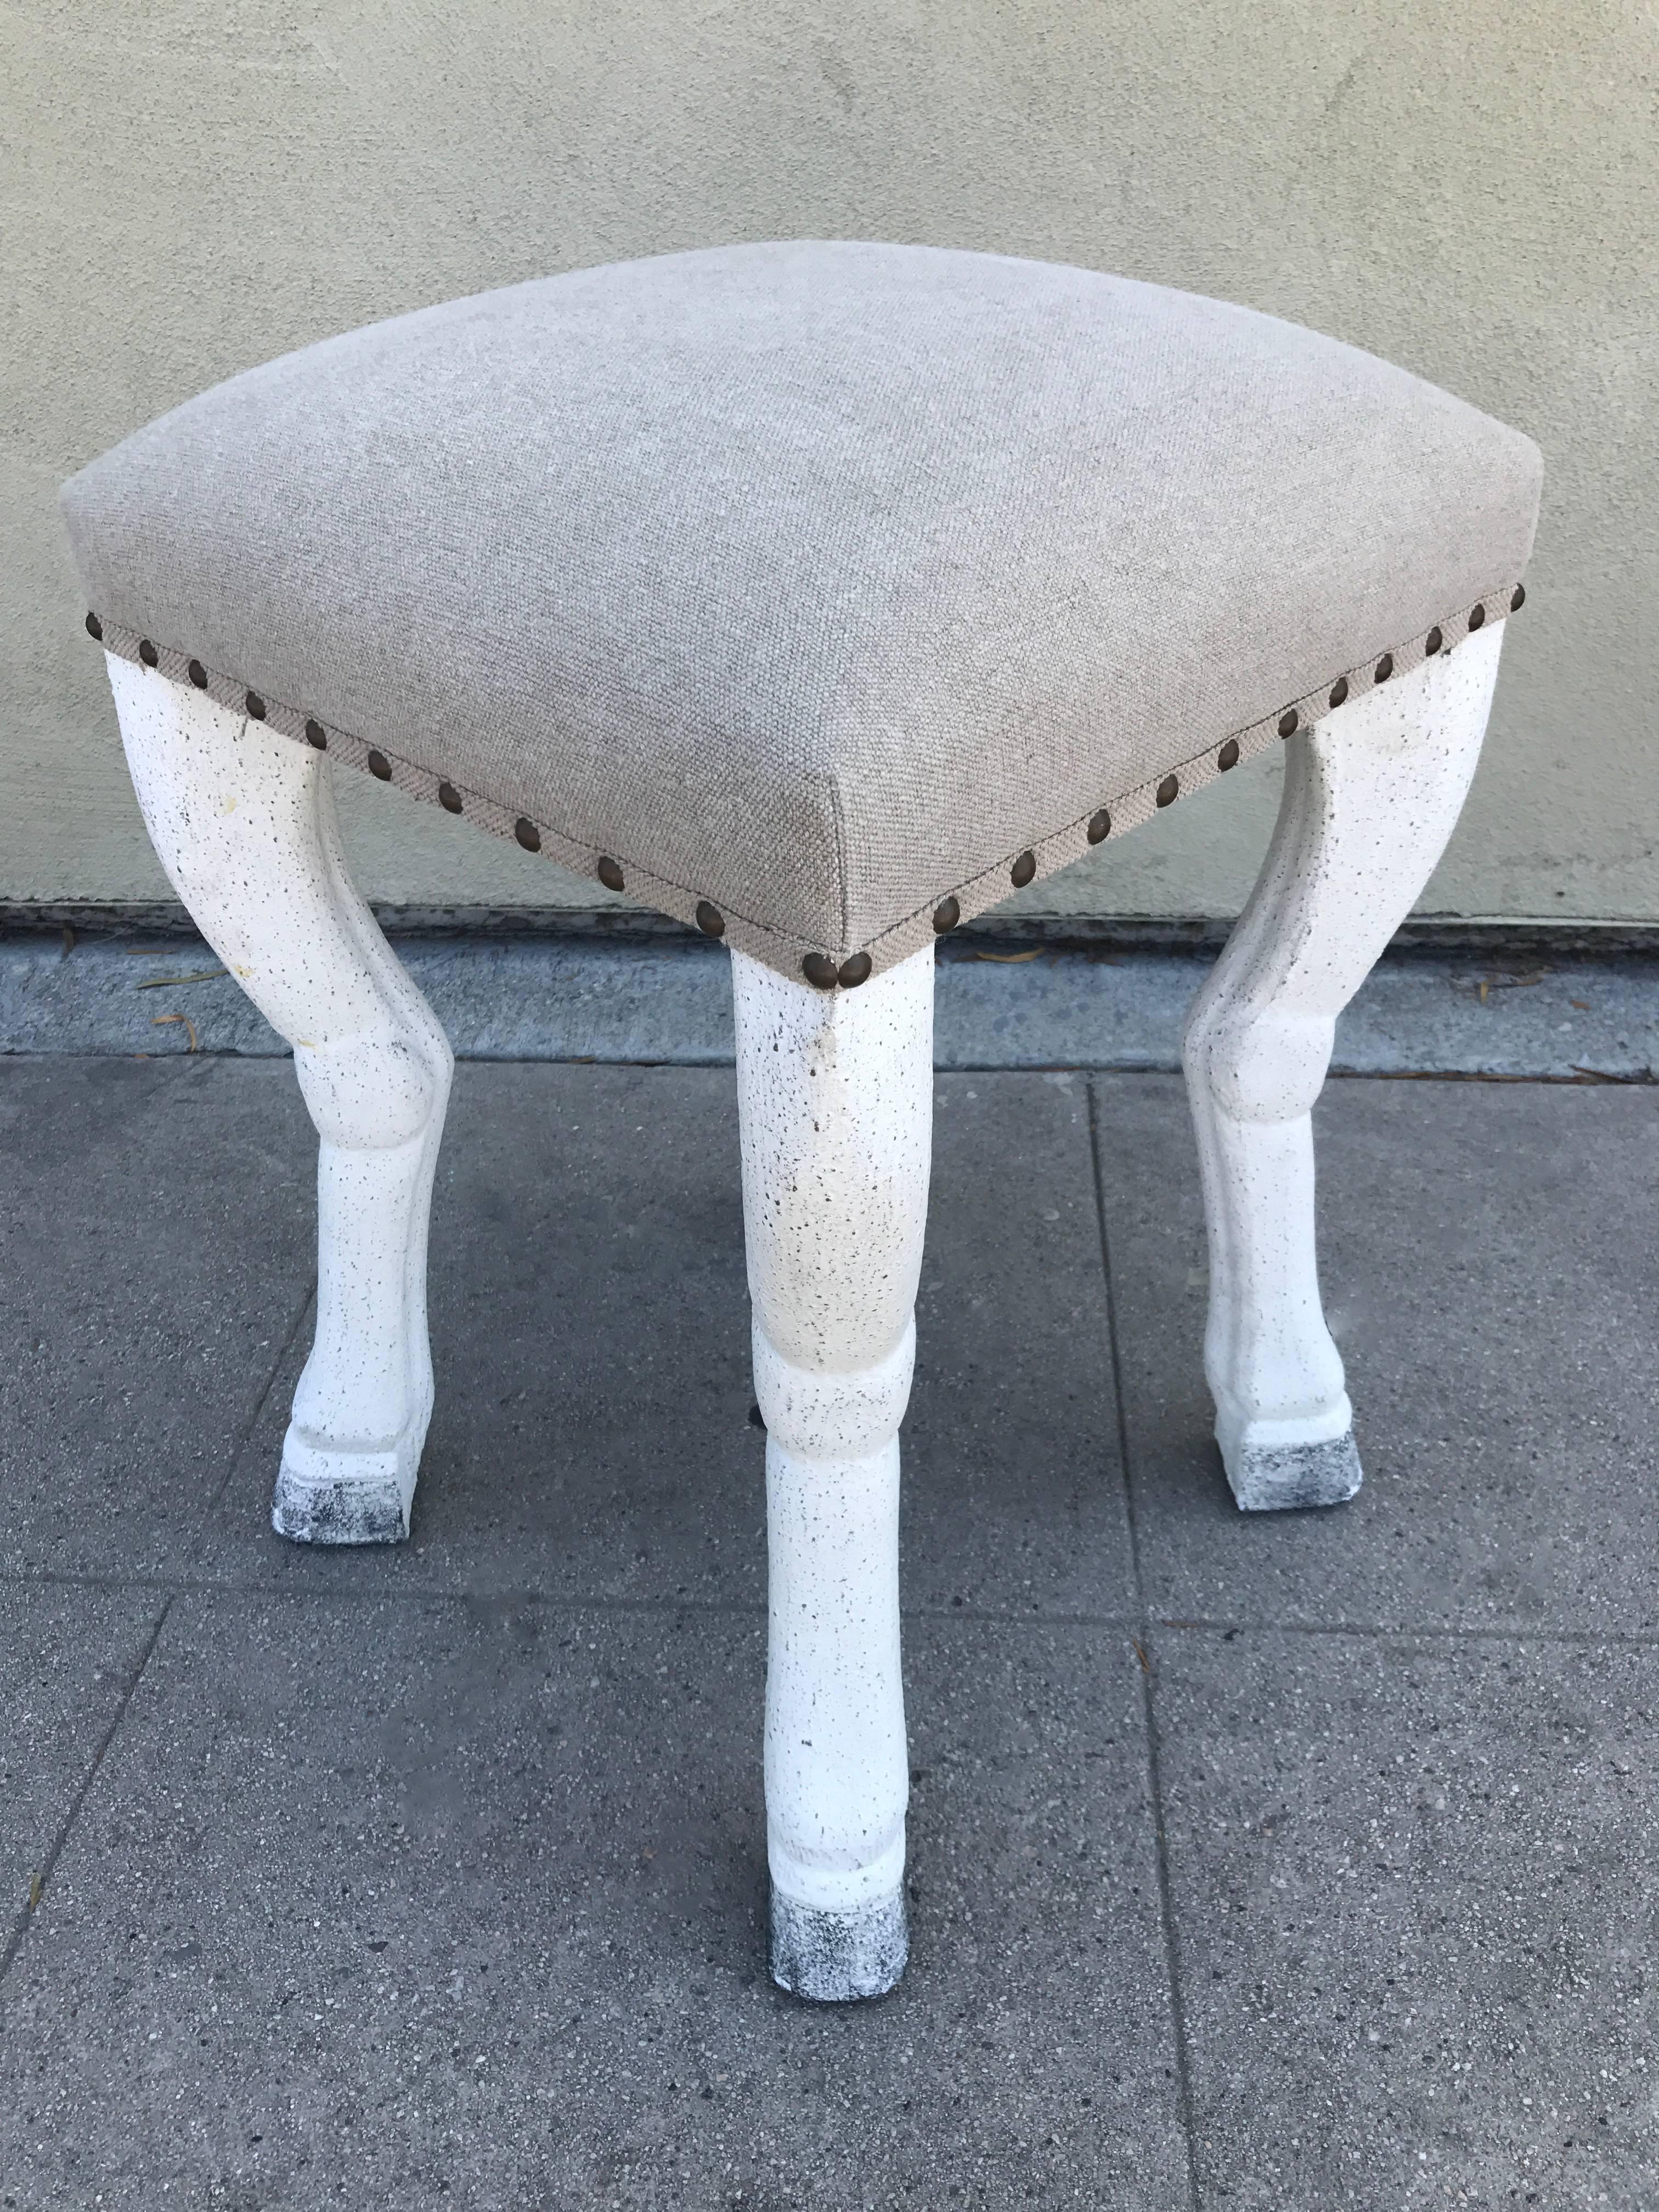 American Beige Upholstered Stool with Zoomorphic Legs after John Dickinson